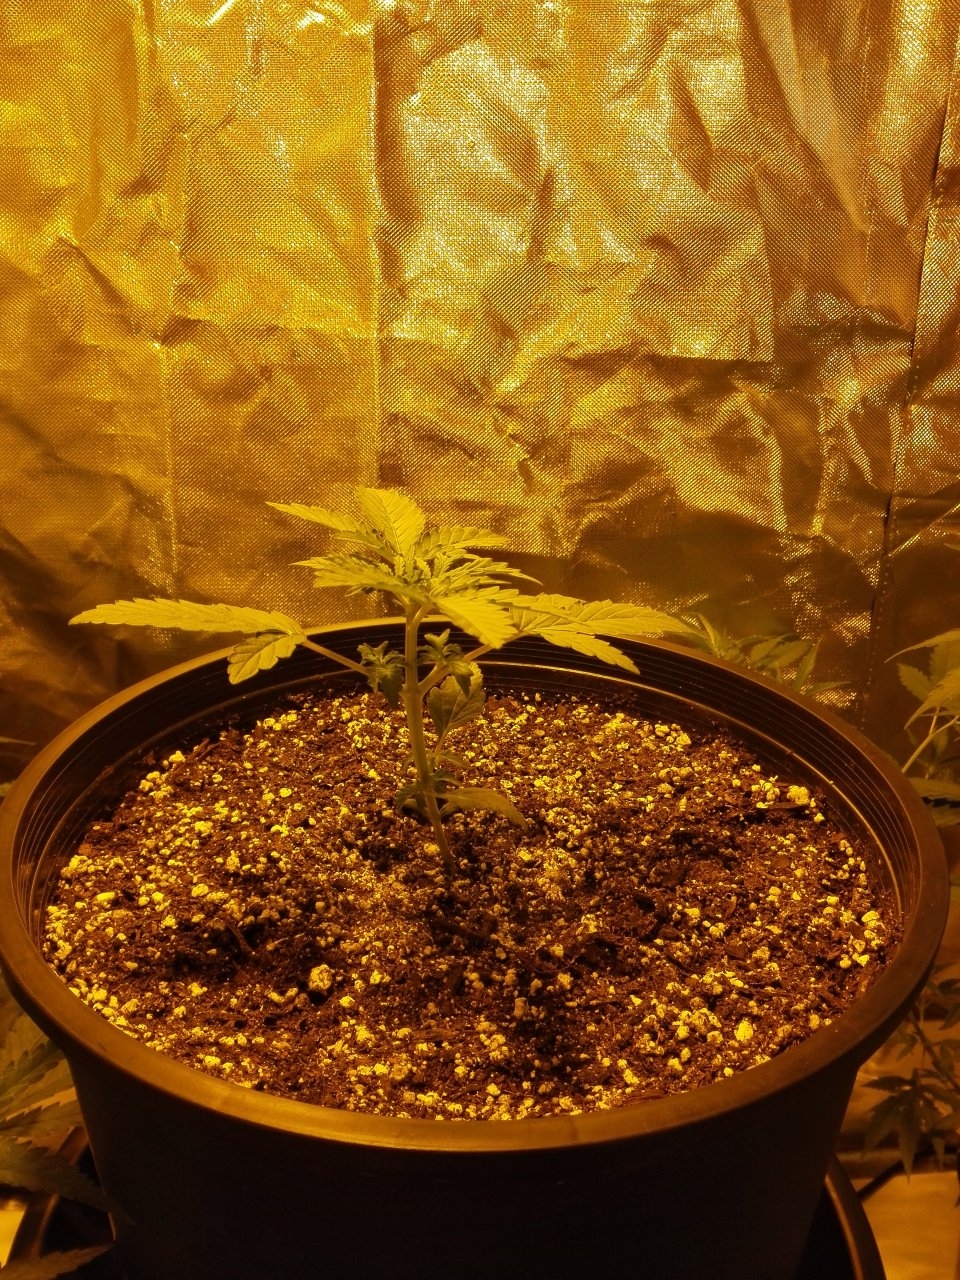 Northern Lights auto day 16 (again)